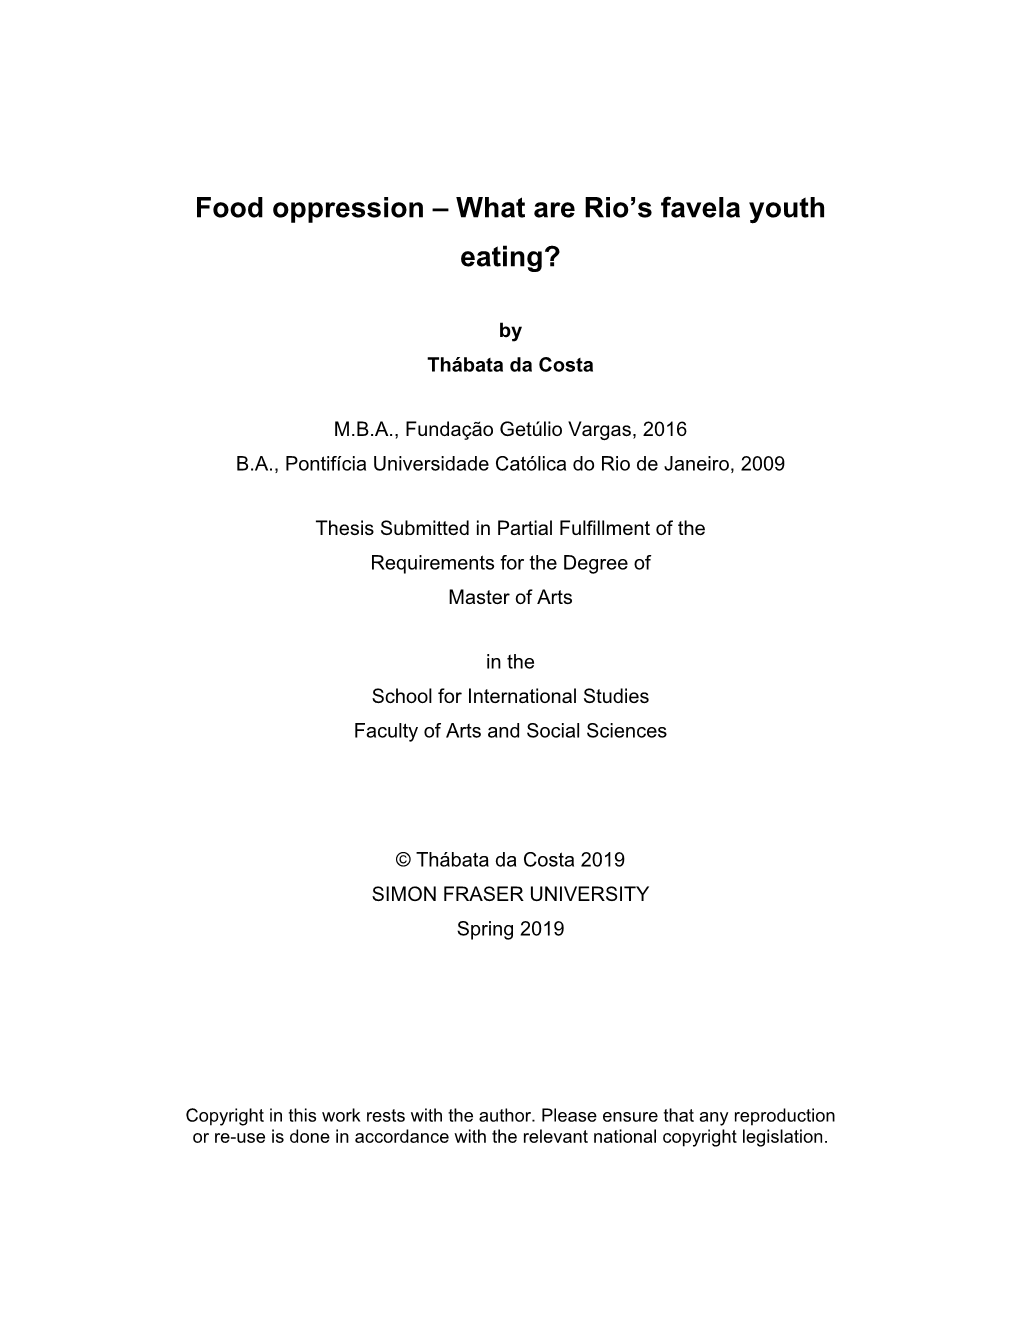 Food Oppression – What Are Rio's Favela Youth Eating?